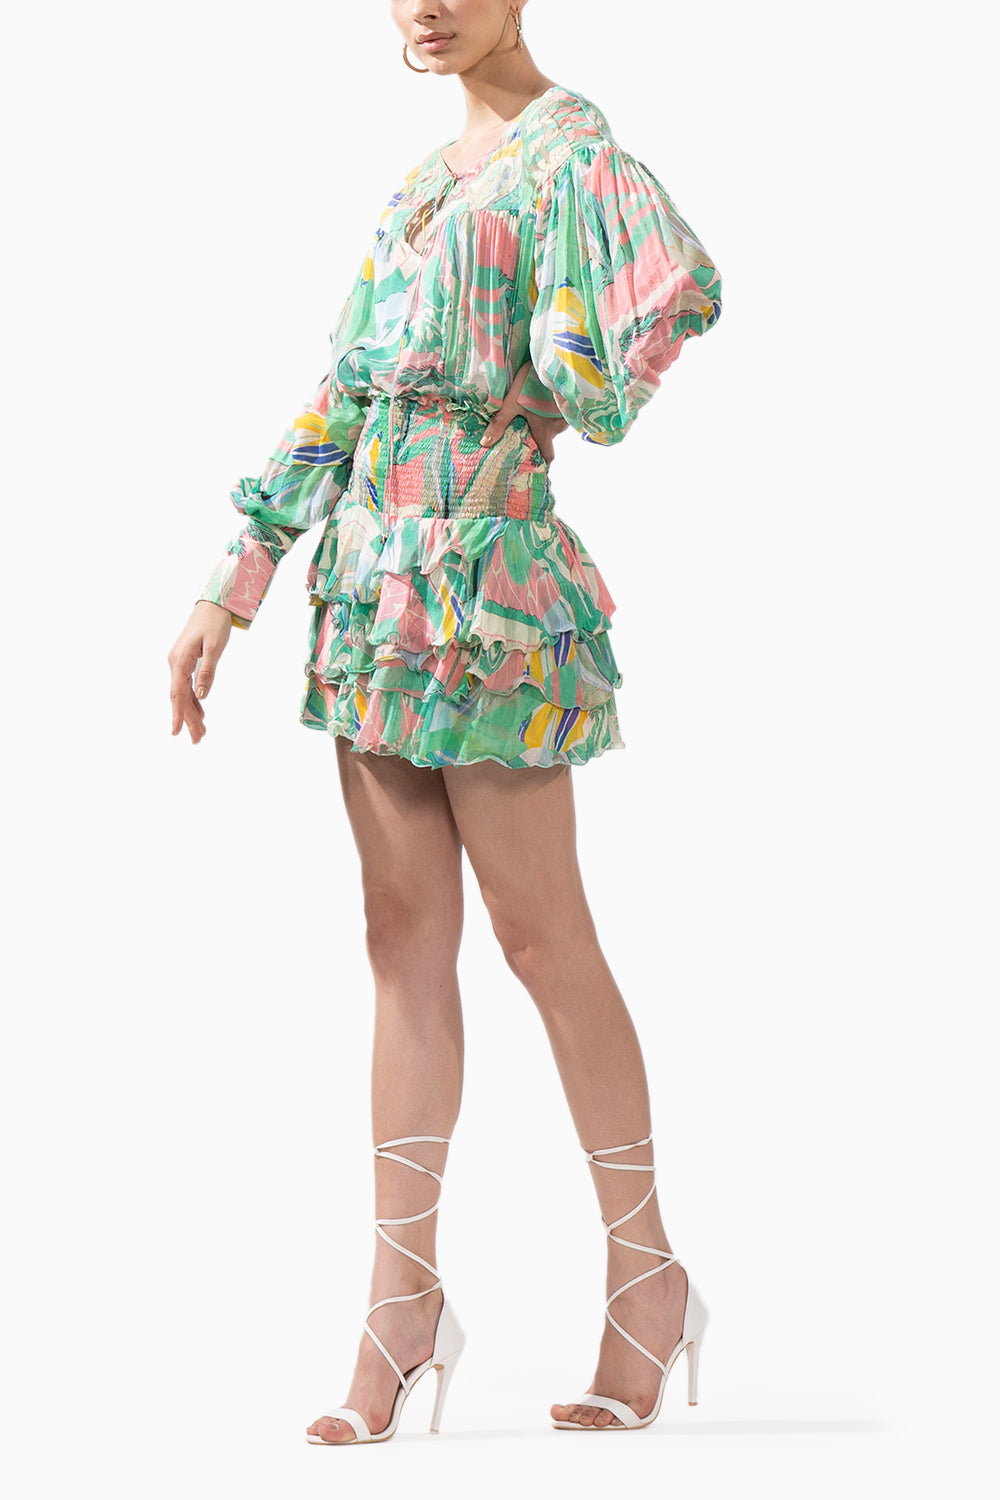 Mint & Pink Abstract Printed Top & Skirt Set